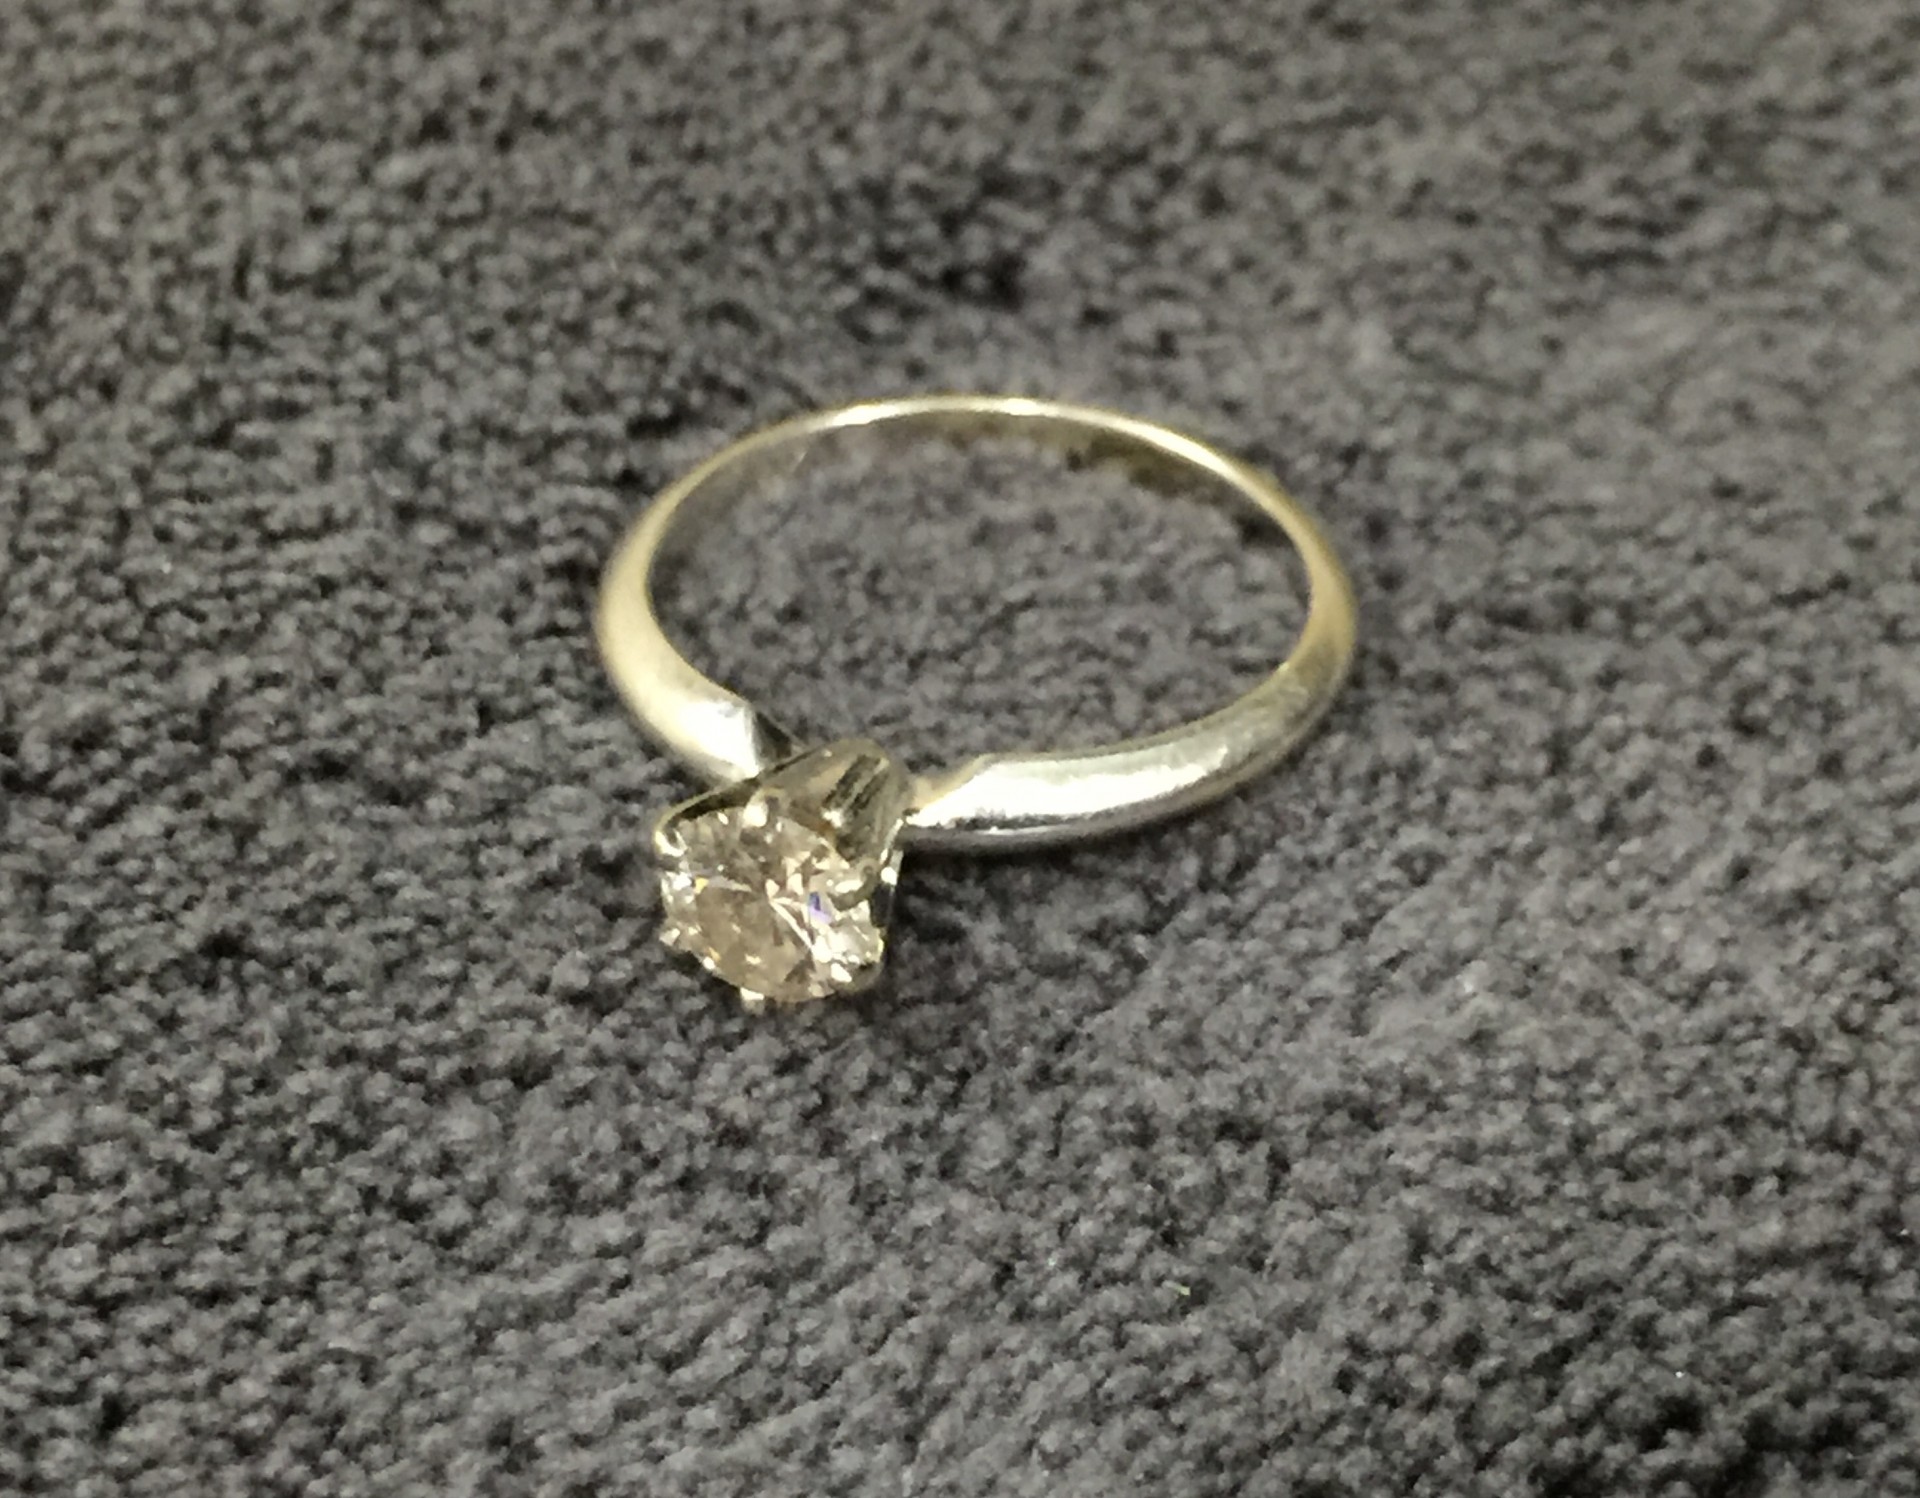 A Little Diamond Ring - Metal Detecting For Jewelry ...